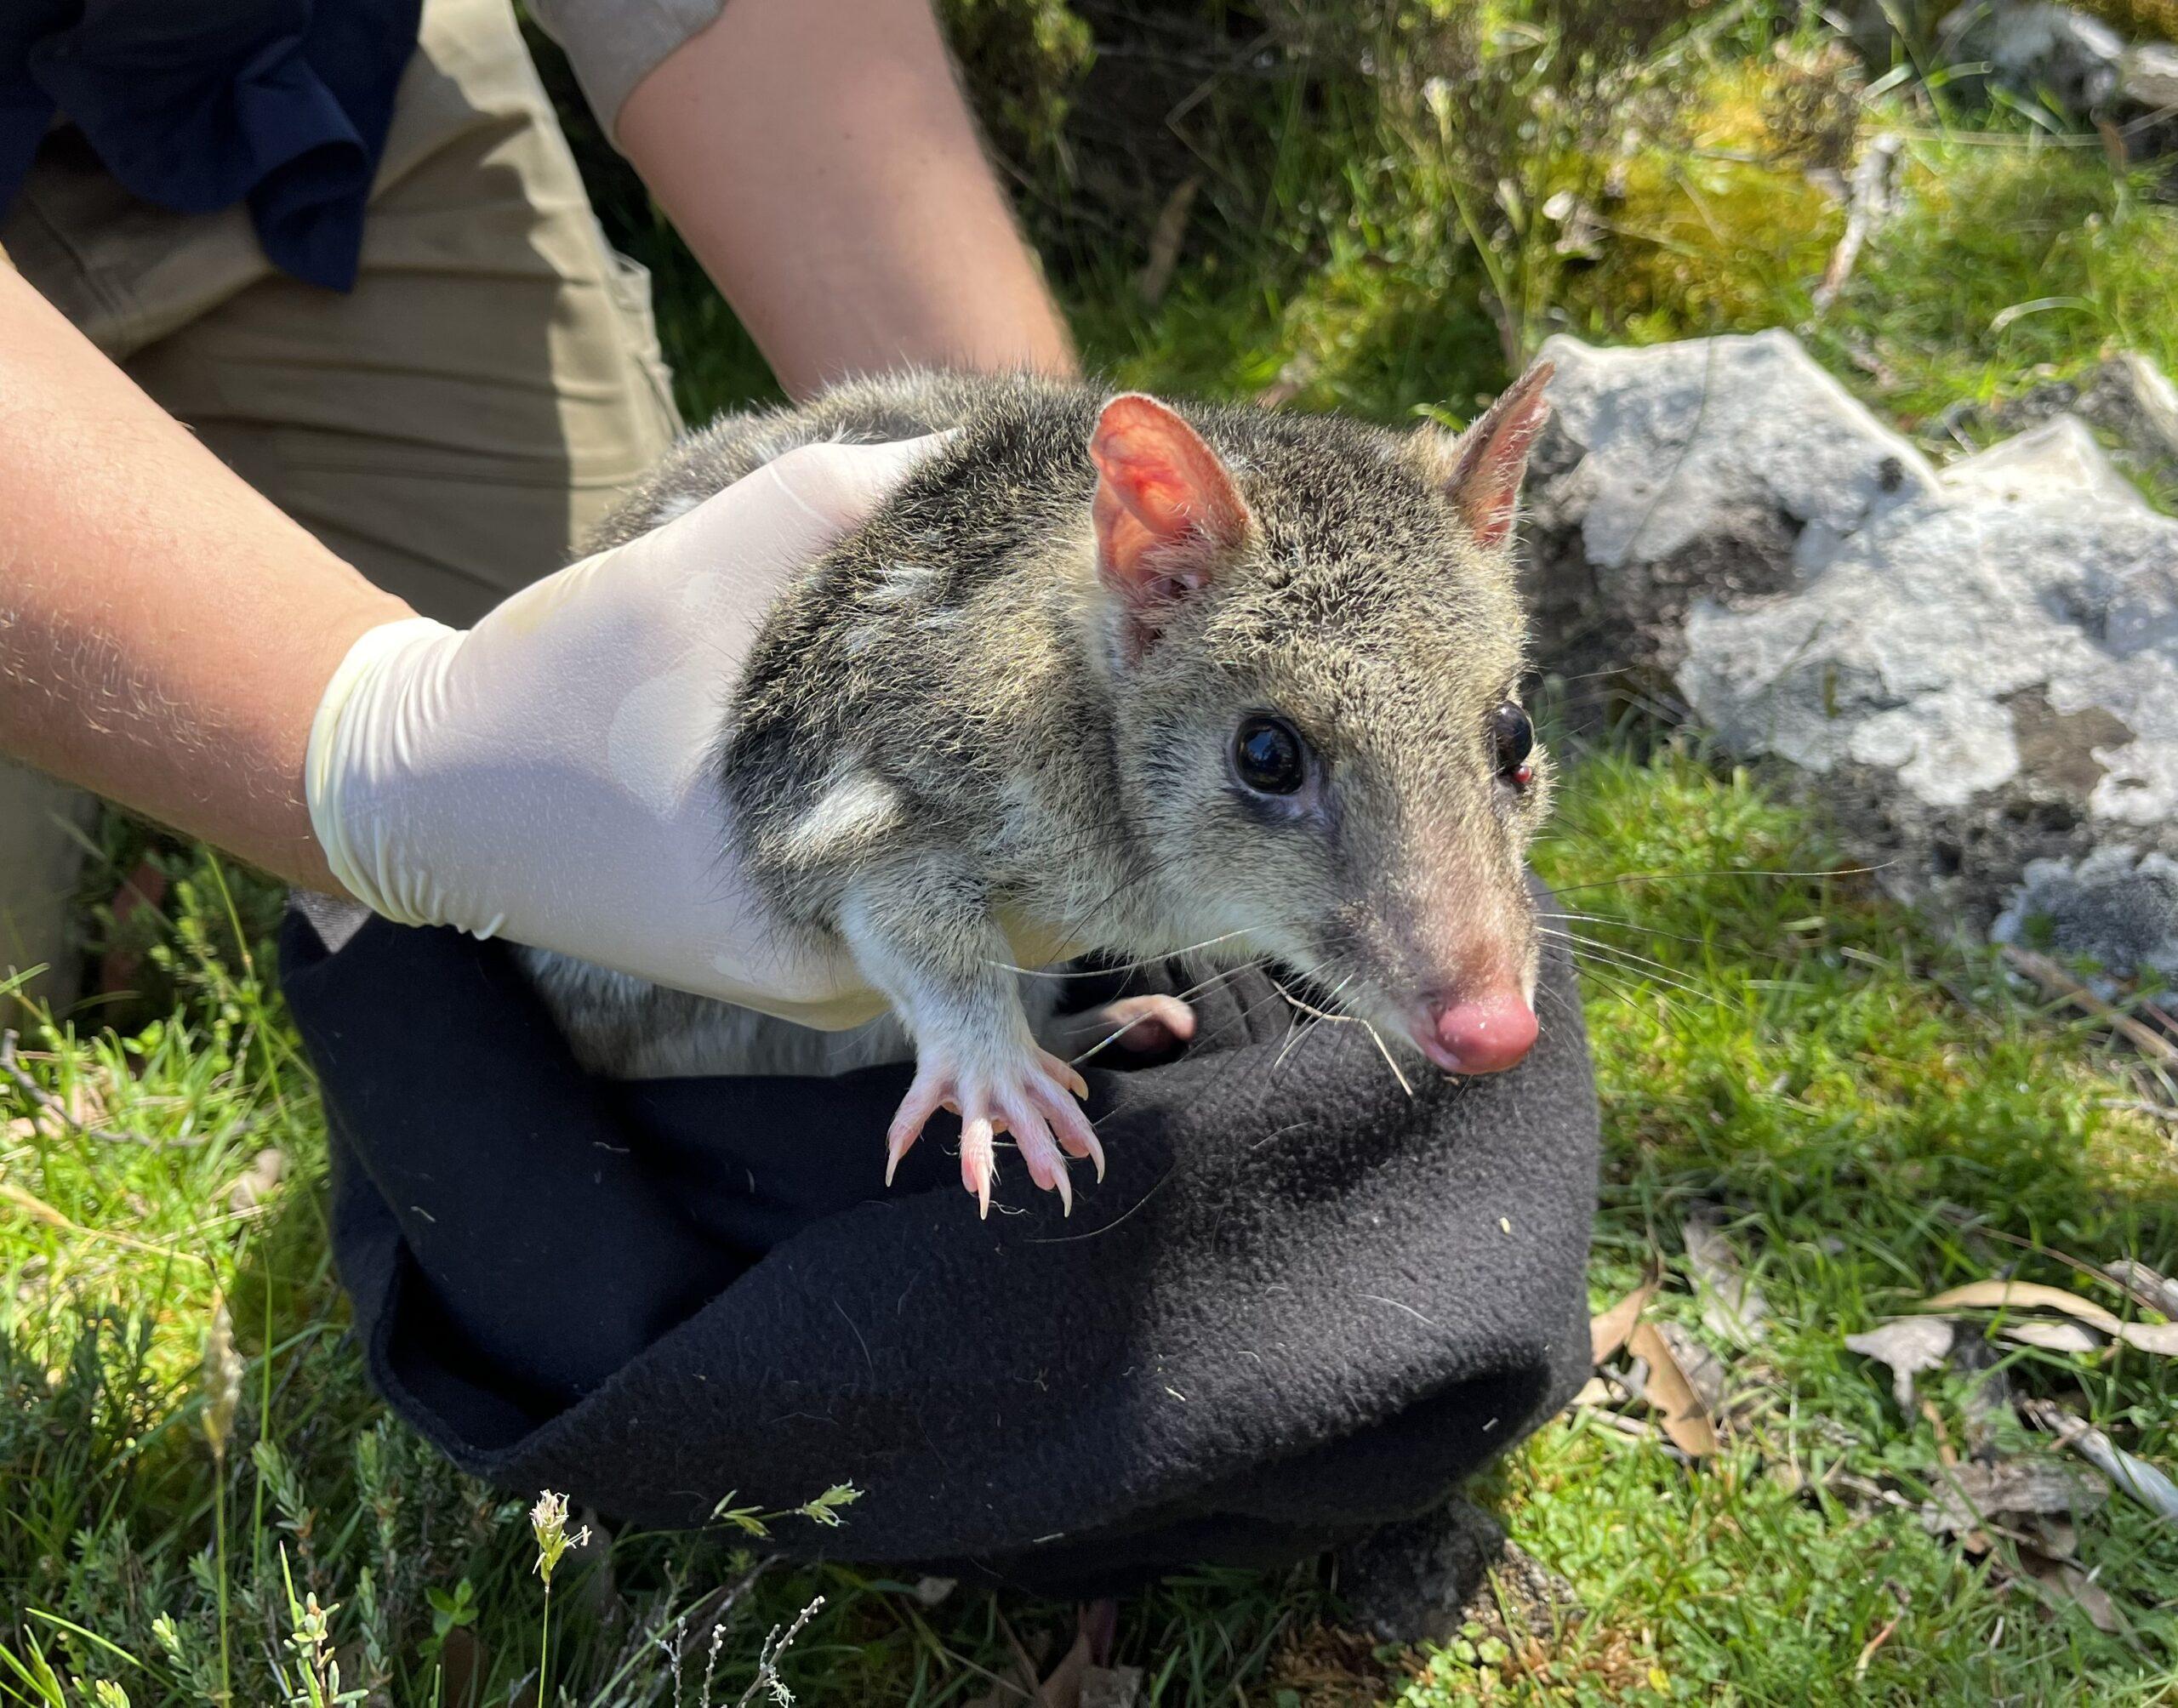 Captive bred eastern quoll alive after 2 years in wild. Photo: Aimee Bliss.